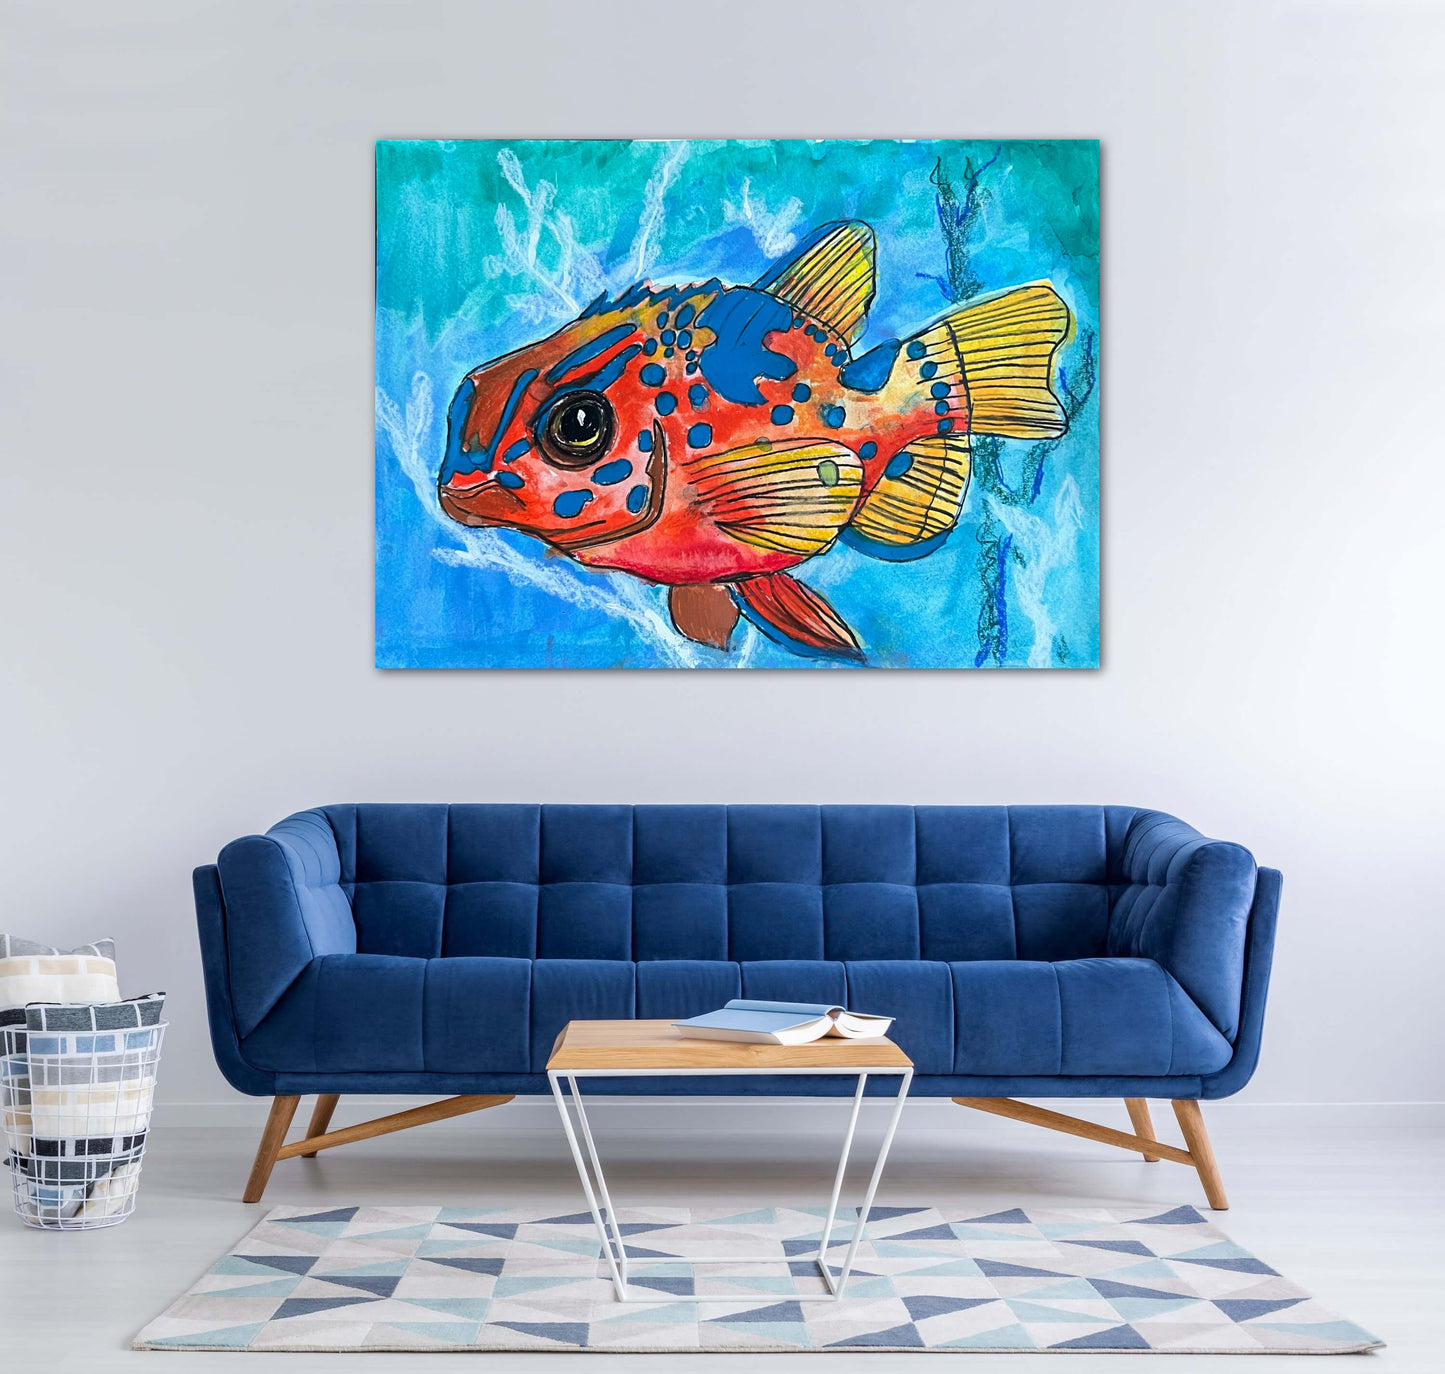 Red Fish - Print, Poster or Stretched Canvas Print in more sizes